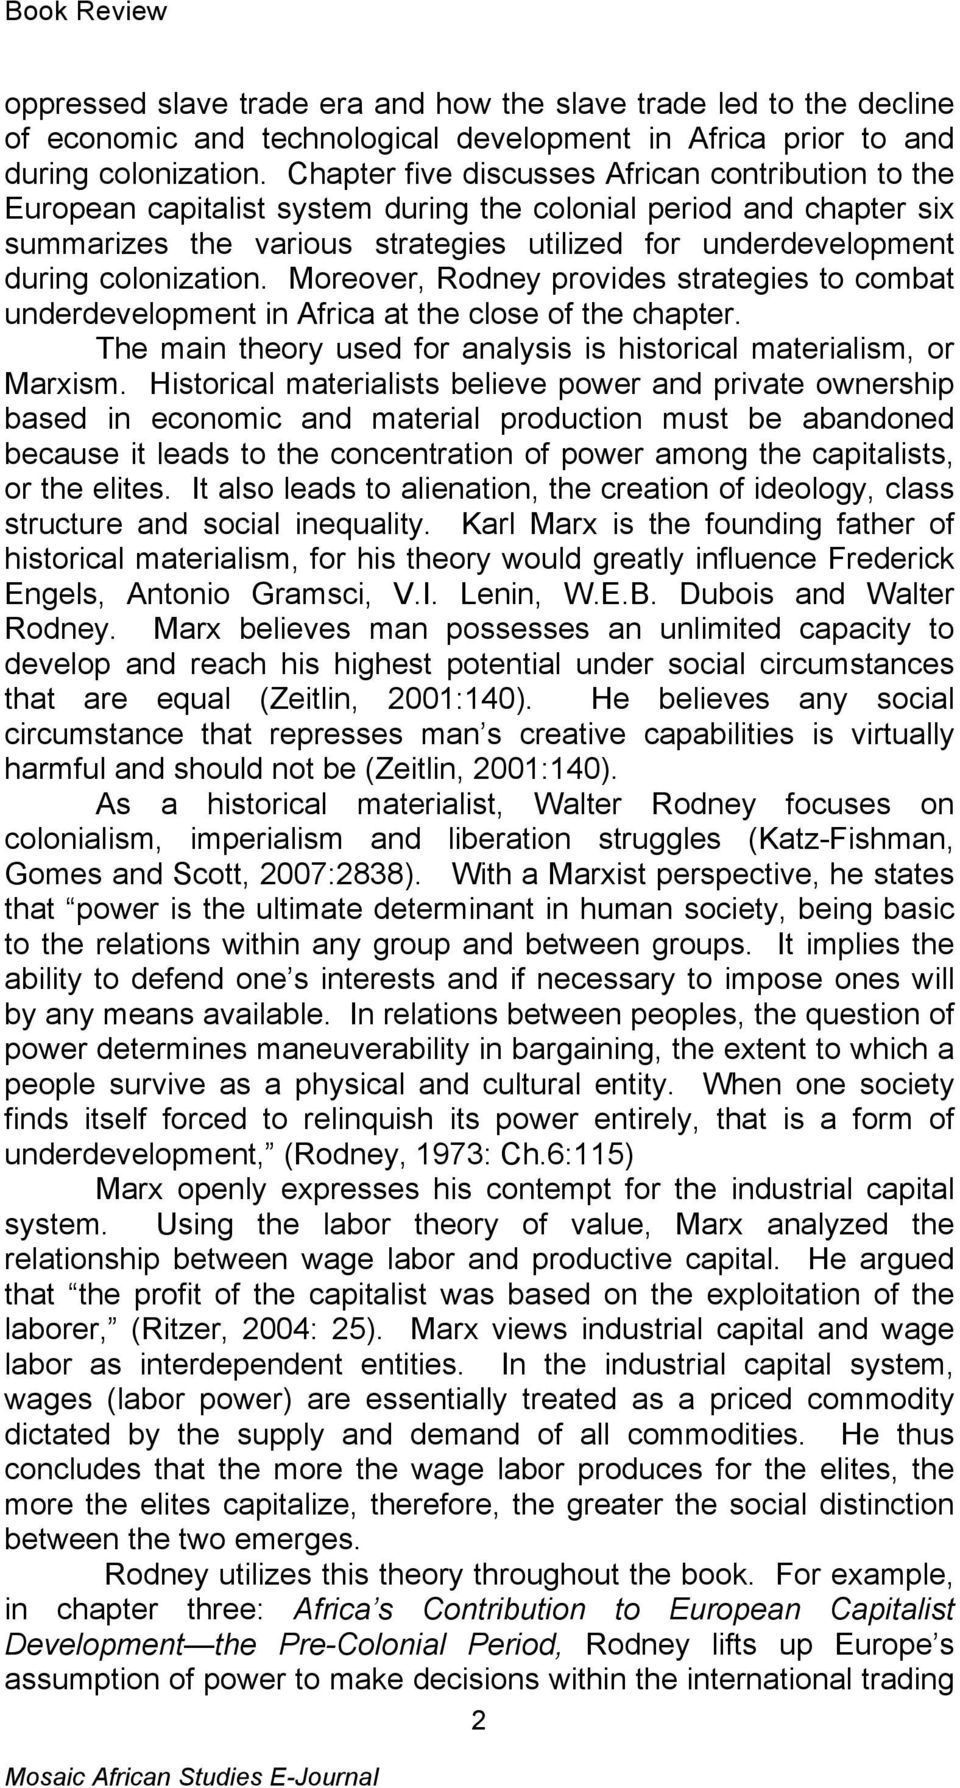 colonization. Moreover, Rodney provides strategies to combat underdevelopment in Africa at the close of the chapter. The main theory used for analysis is historical materialism, or Marxism.